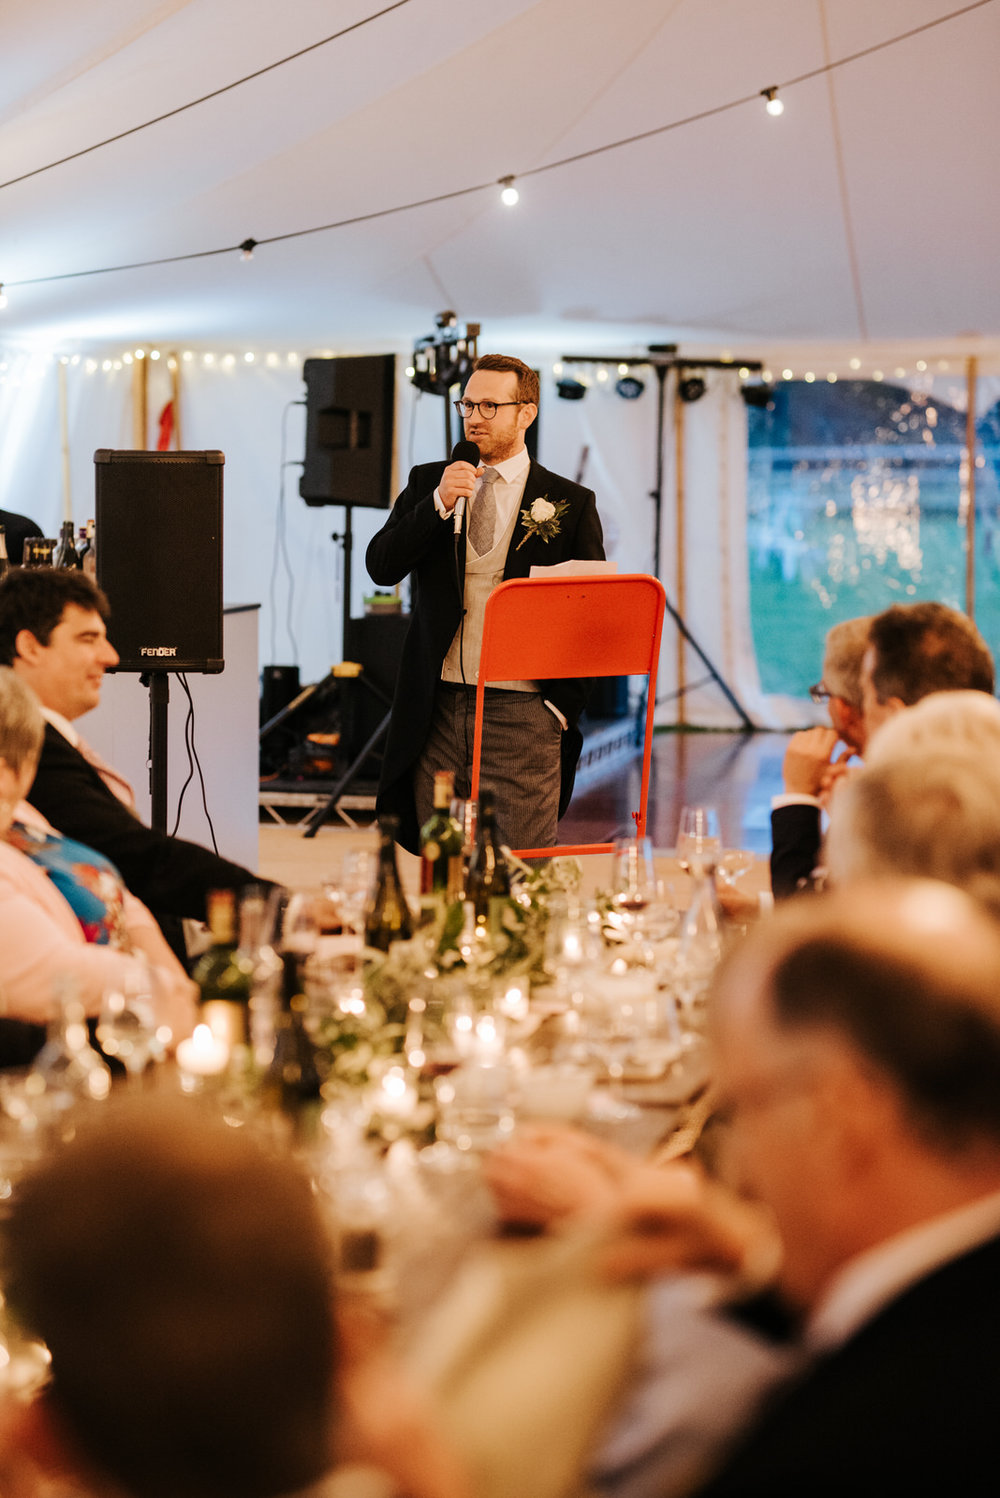  Groom delivers his wedding speech while standing at podium with guests in front 